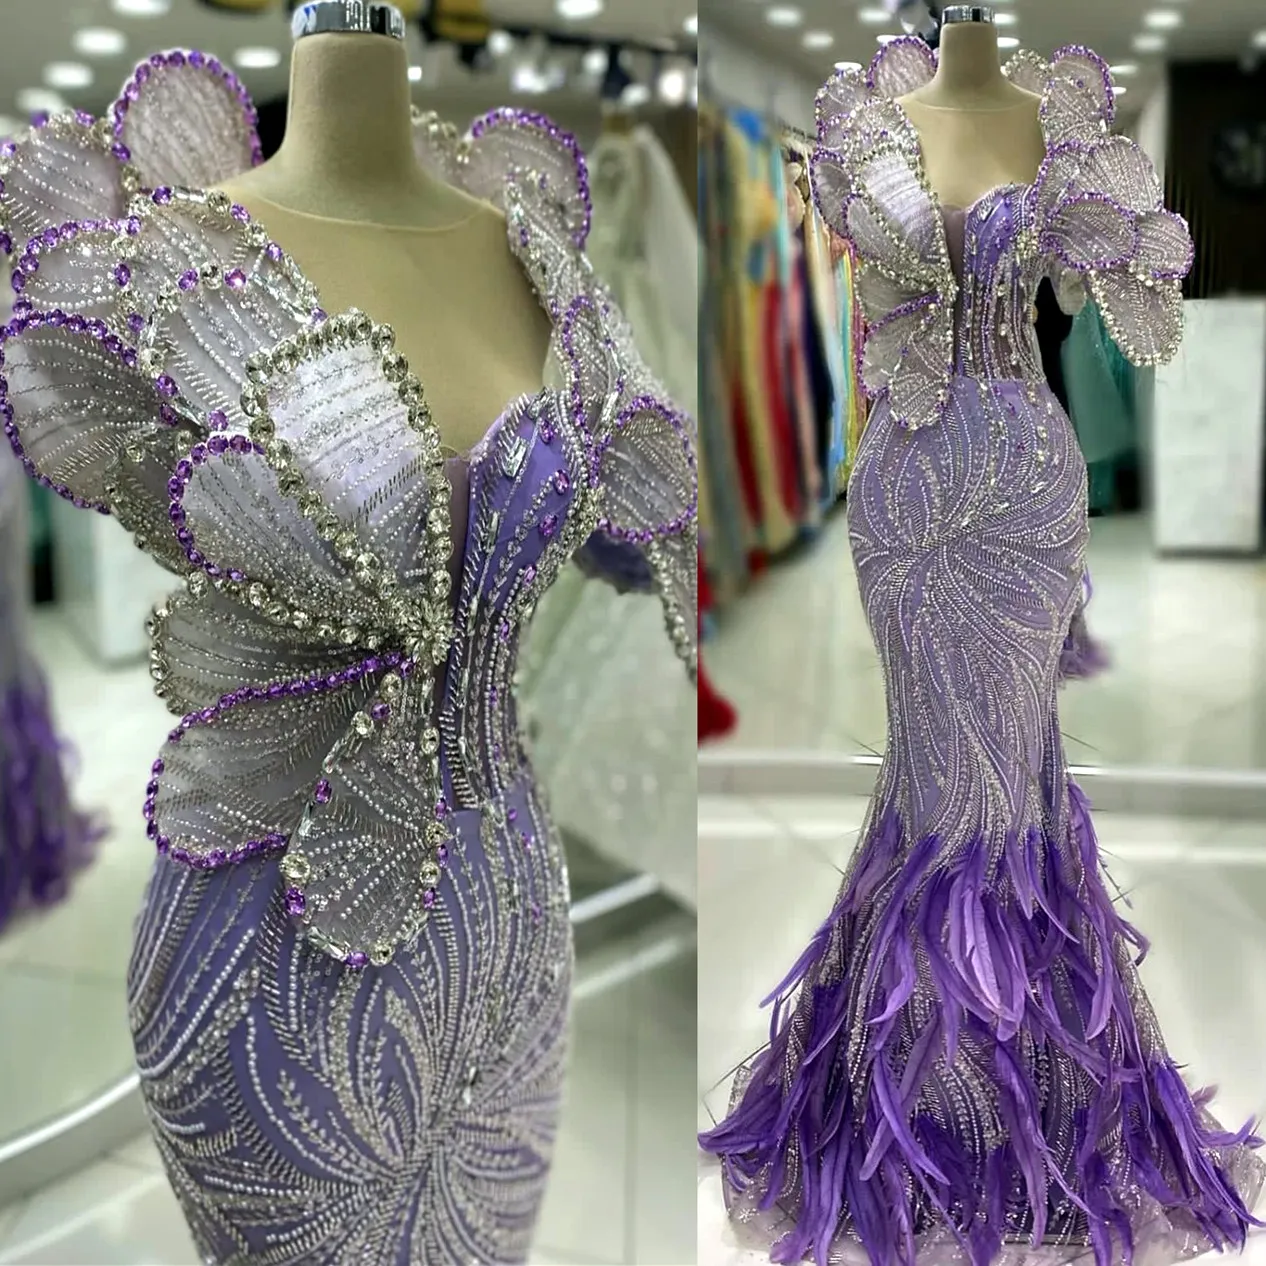 Ebi 2024 Aso Lavender Mermaid Prom Dress Beaded Crystals Feather Evening Formal Party Second Reception Birthday Engagement Gowns Dresses Robe De Soiree Zj10 es